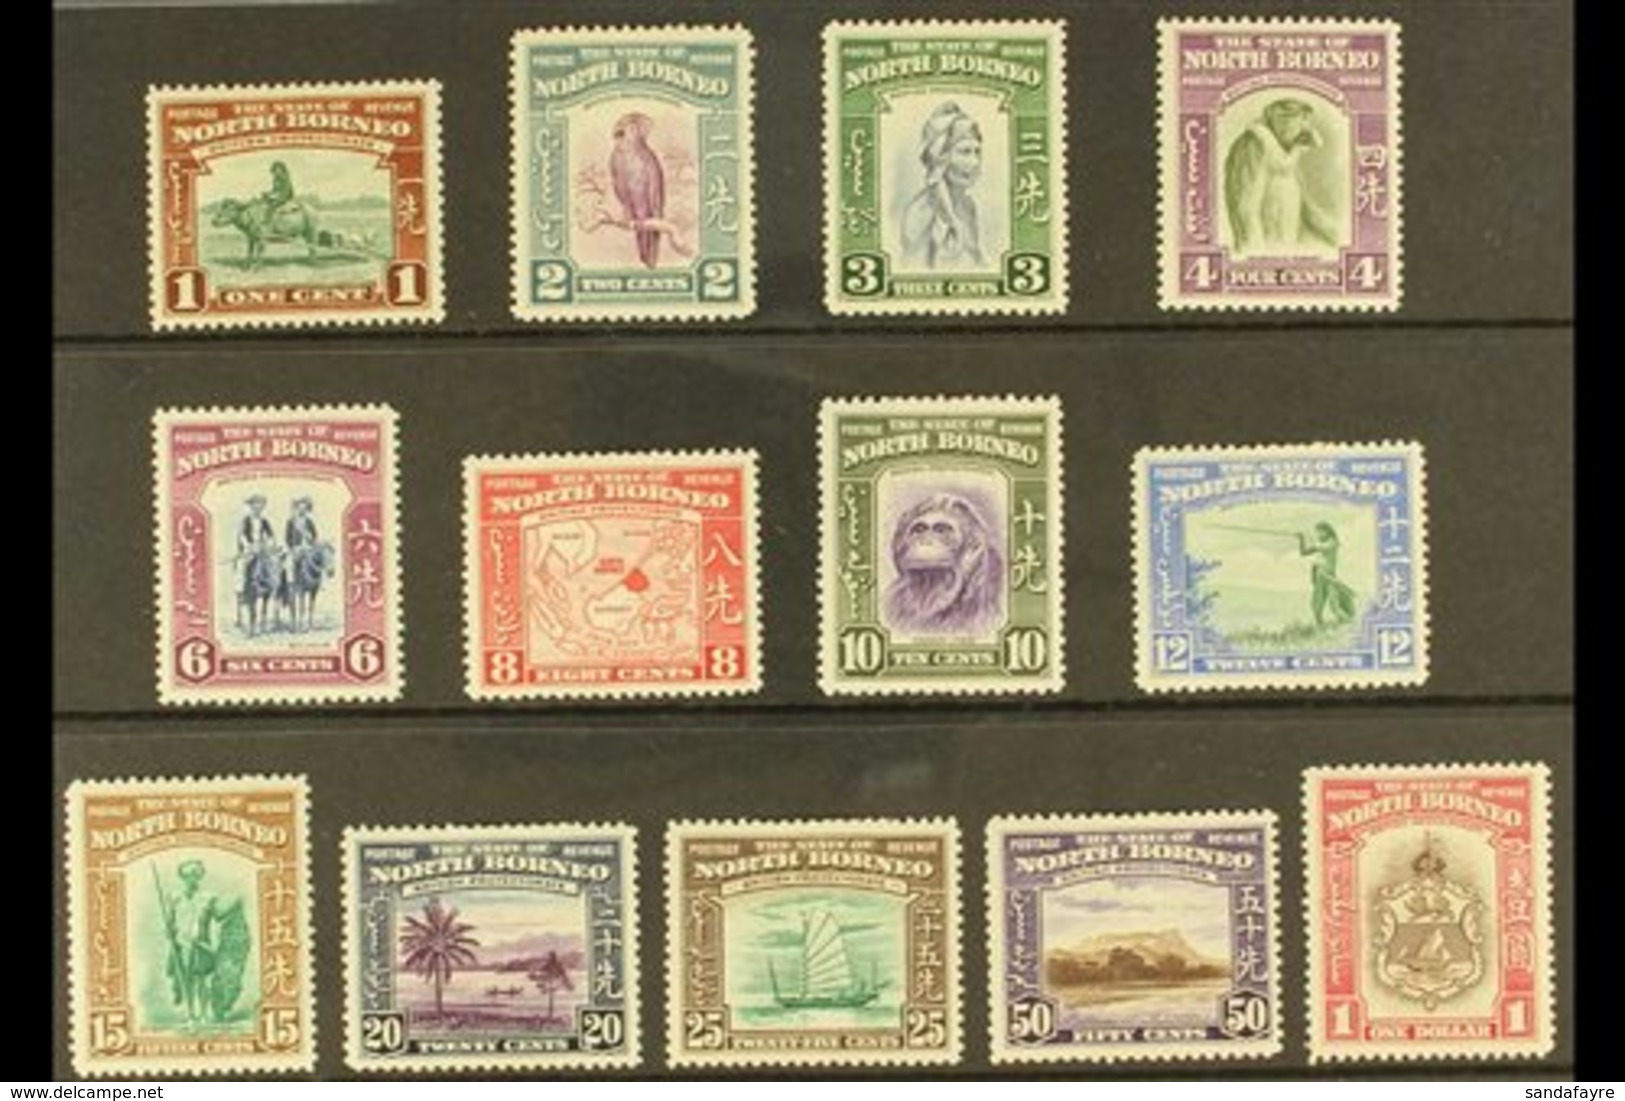 1939 Pictorial Definitive Set Complete To $1, SG 303/315, Mint, Mostly Fine Including The Good $1 Value. (13 Stamps) For - North Borneo (...-1963)